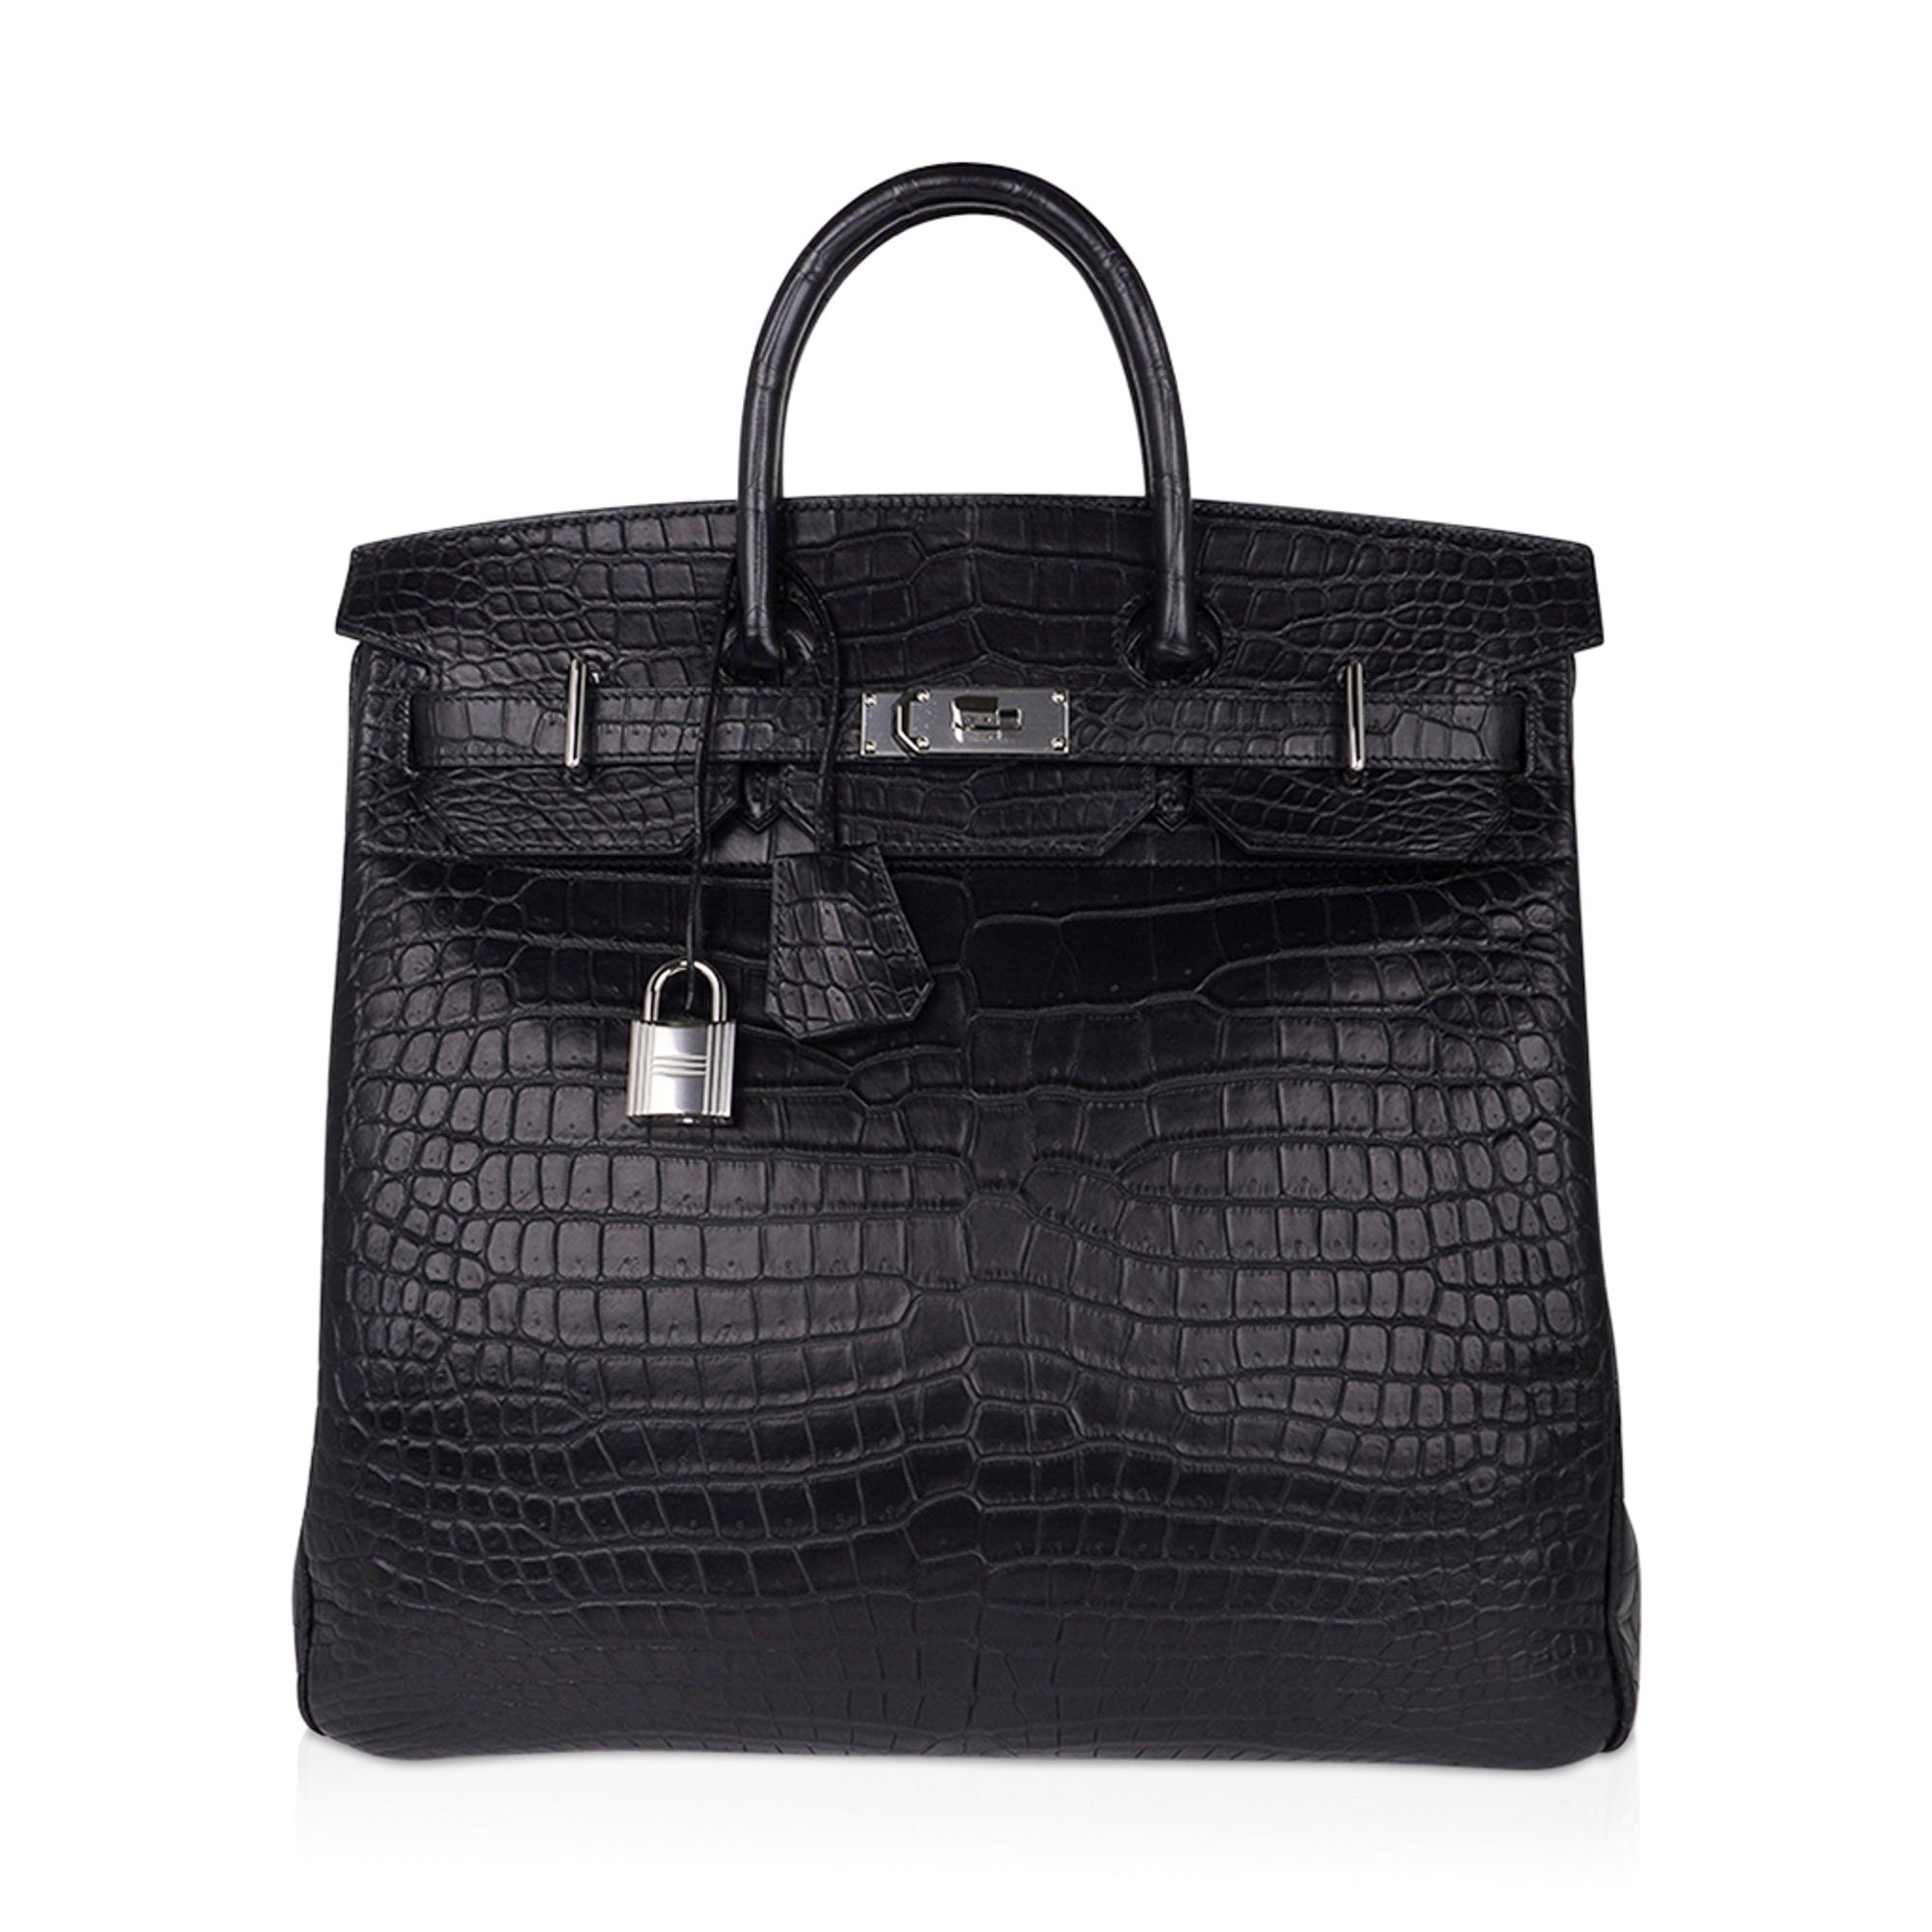 Why a Hermès Birkin bag is such a good investment, according to